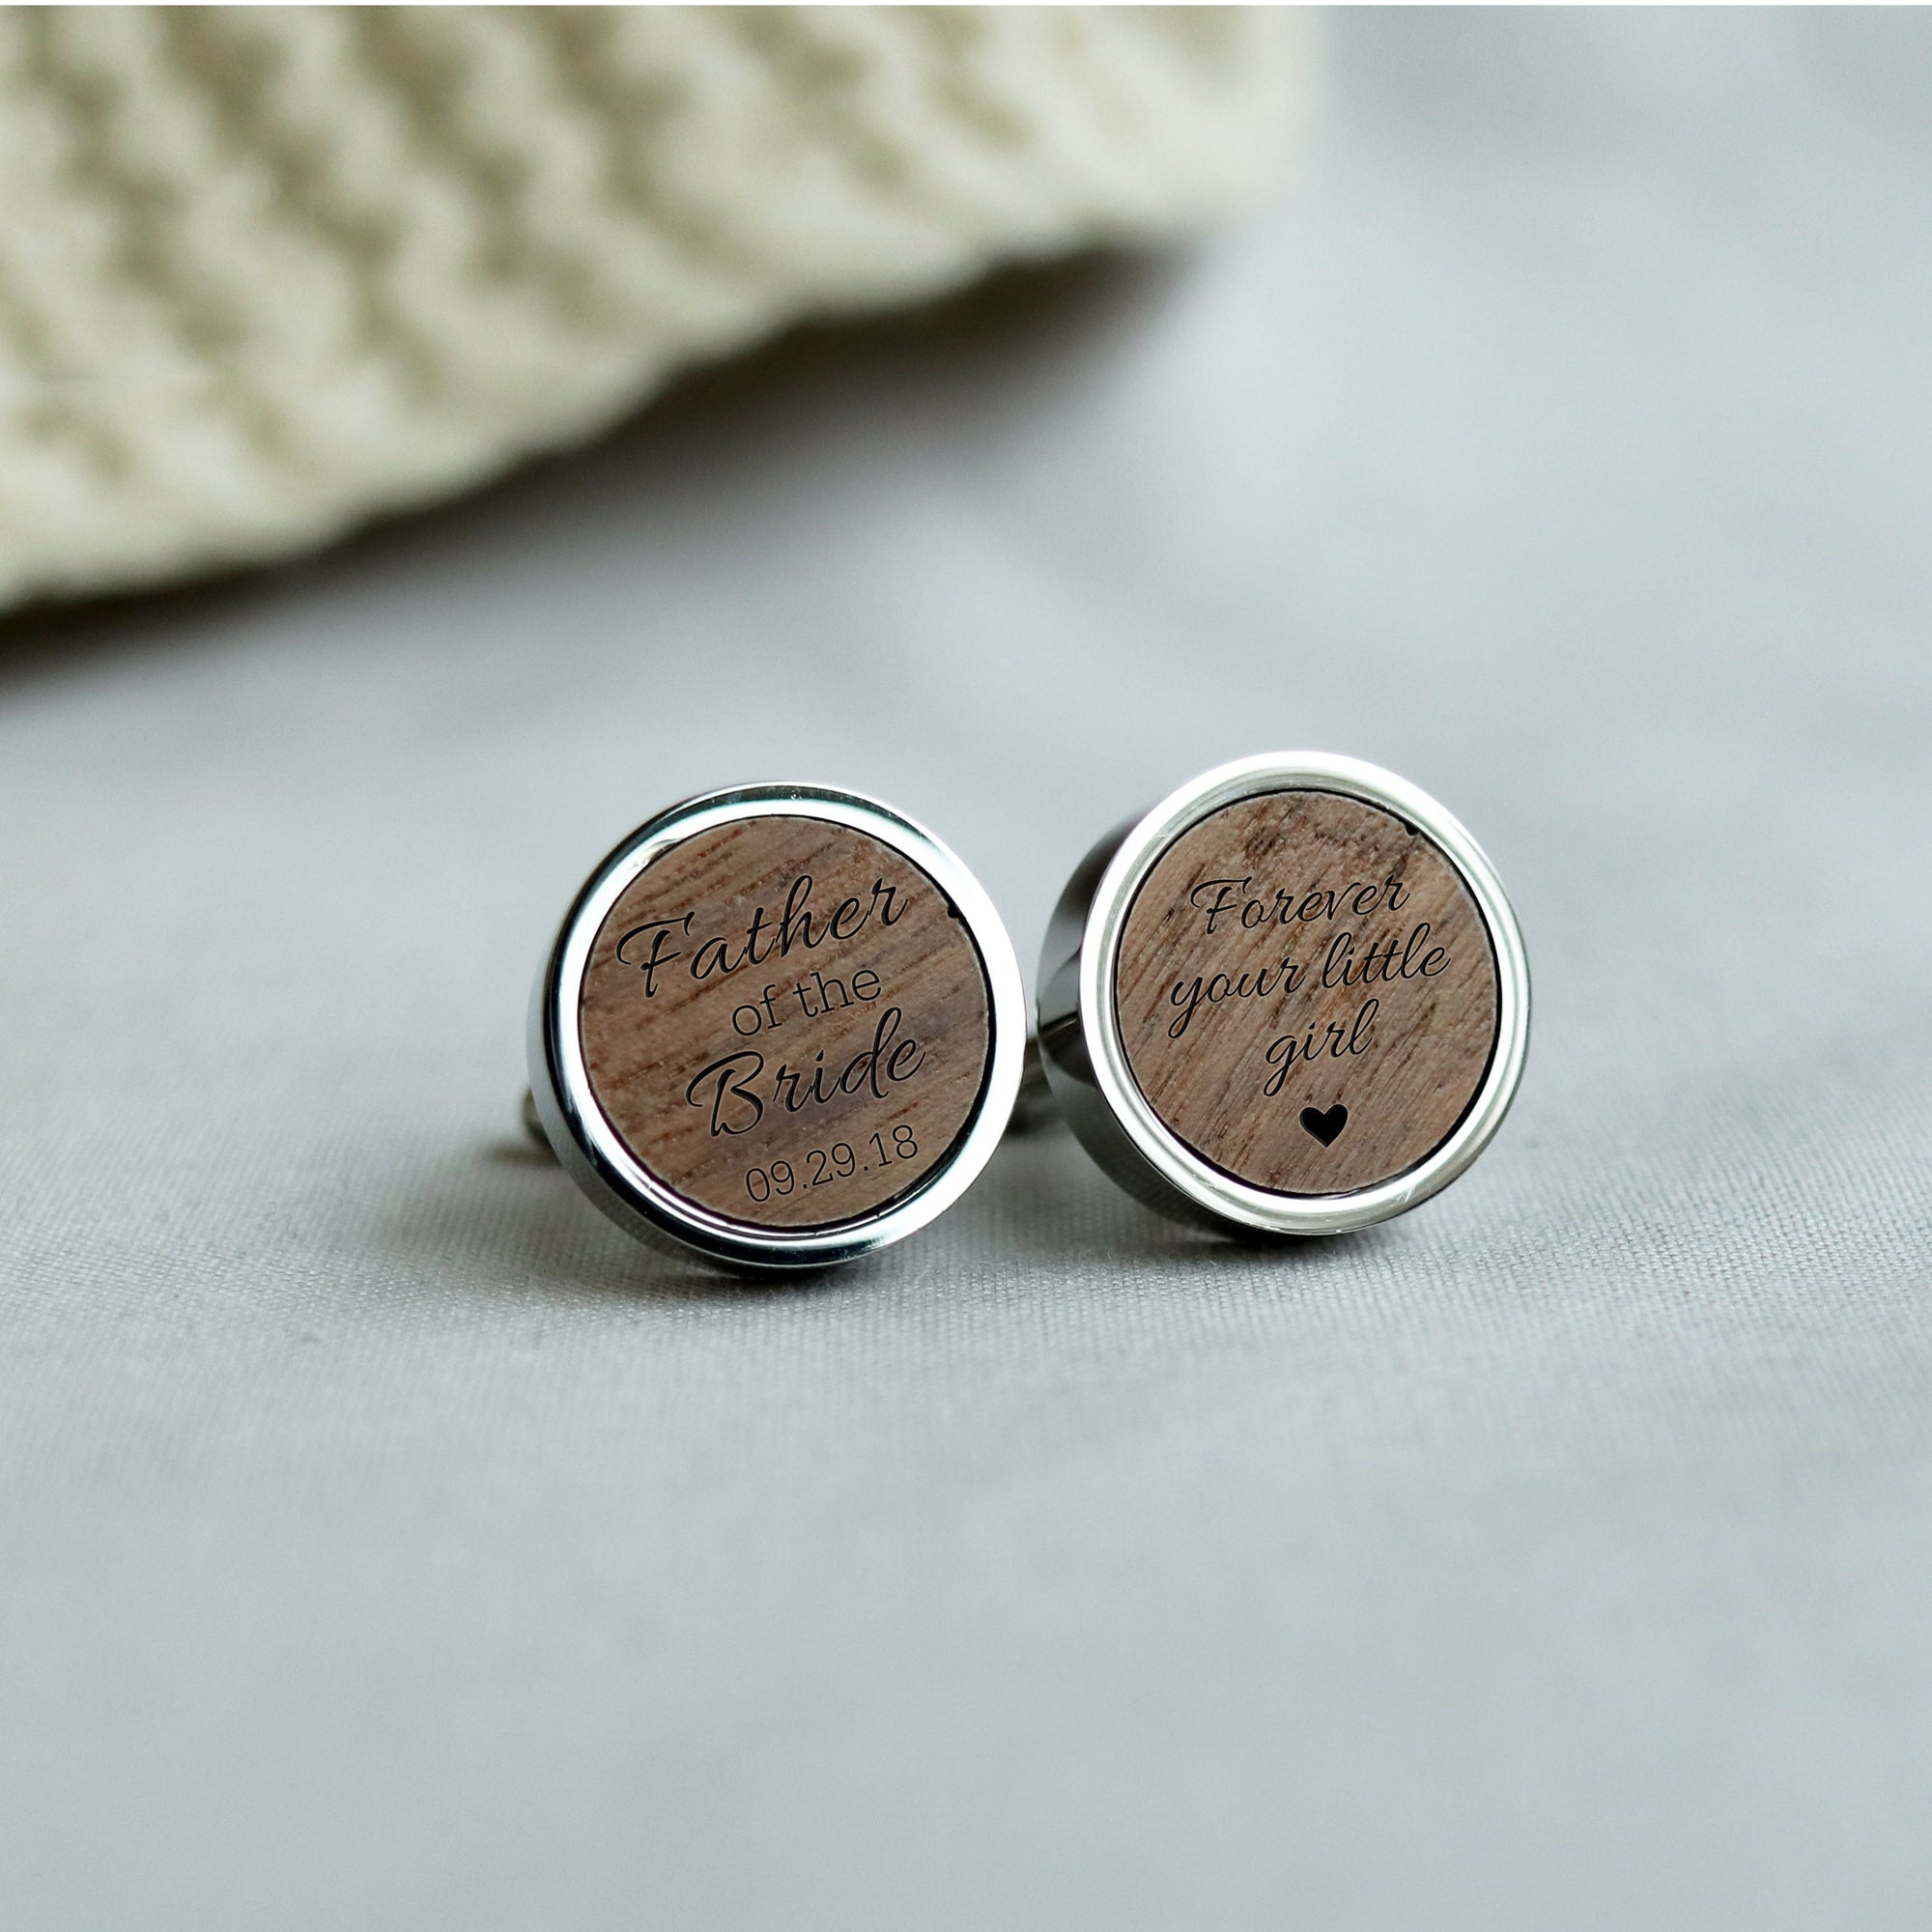 Laser Engraved Personalized Cufflinks, Wood, Wedding Date, Custom Cuff links, Gifts for Men, Gift for Father of the Bride, TBC10047